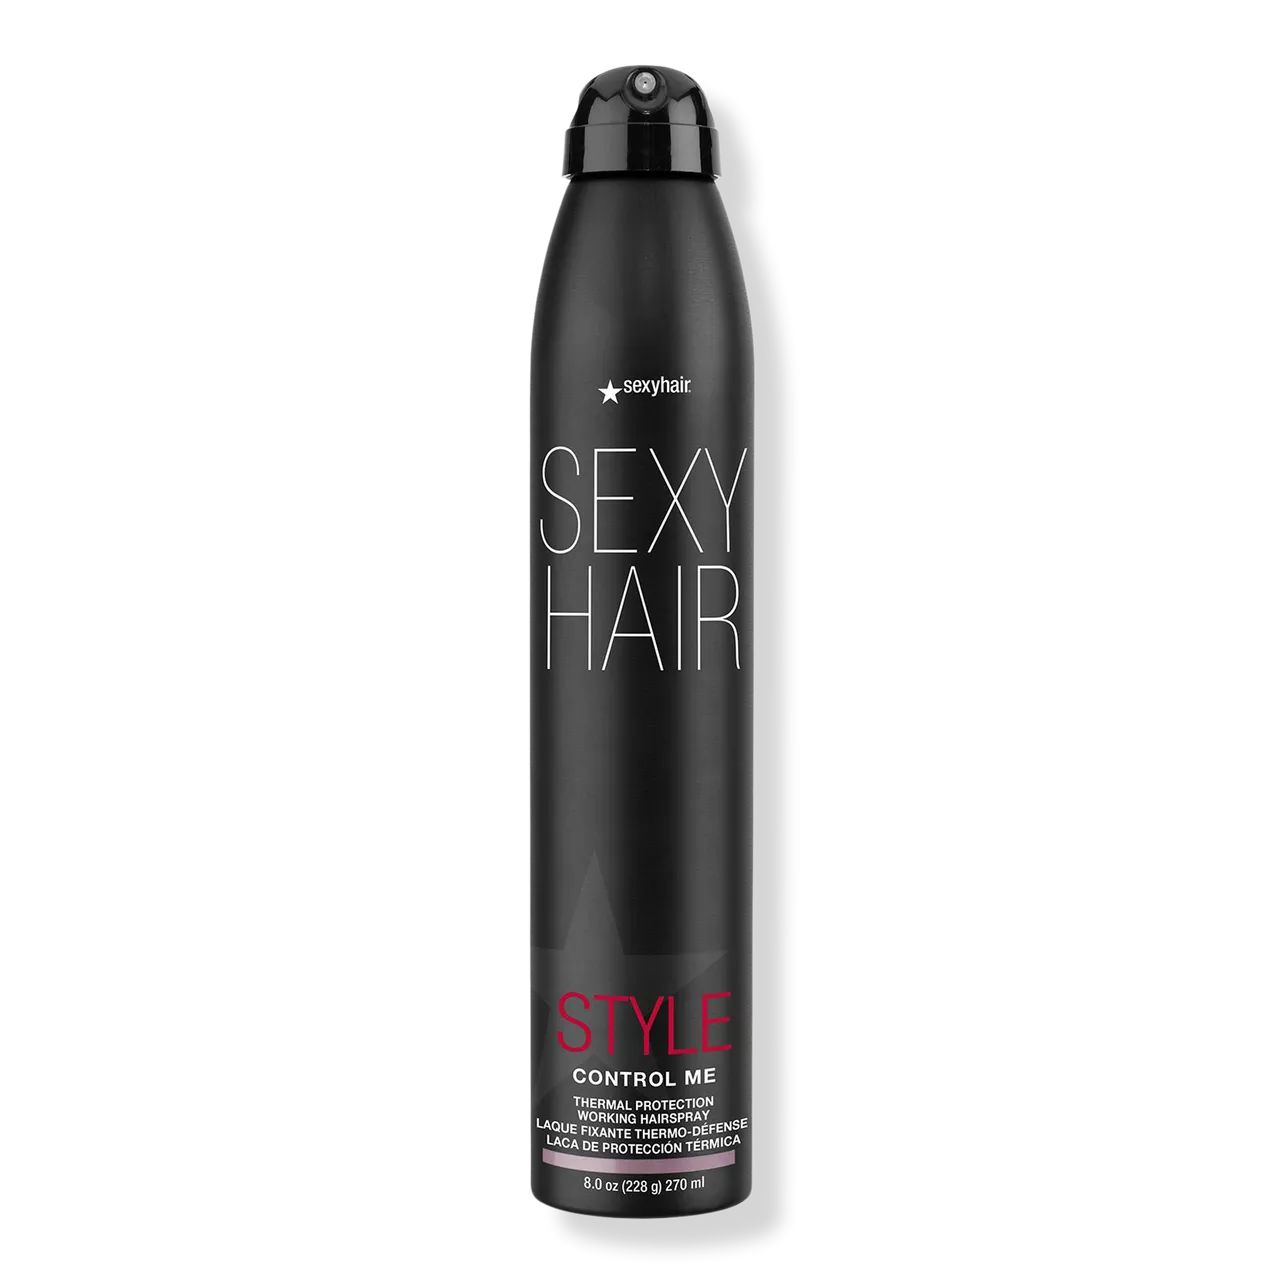 Style Sexy Hair Control Me Thermal Protection Working Hairspray | Ulta